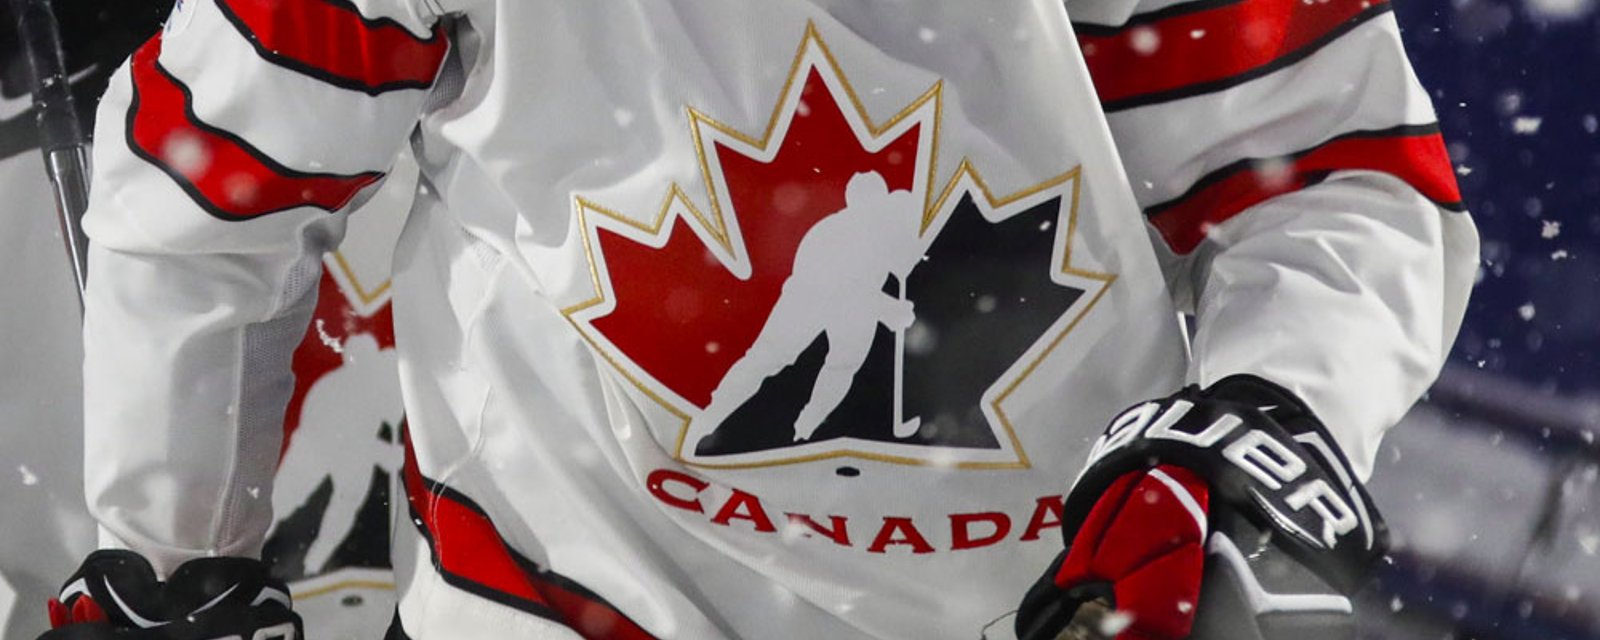 Hockey Canada forced to remove word “Midget” from minor hockey after facing public outcry